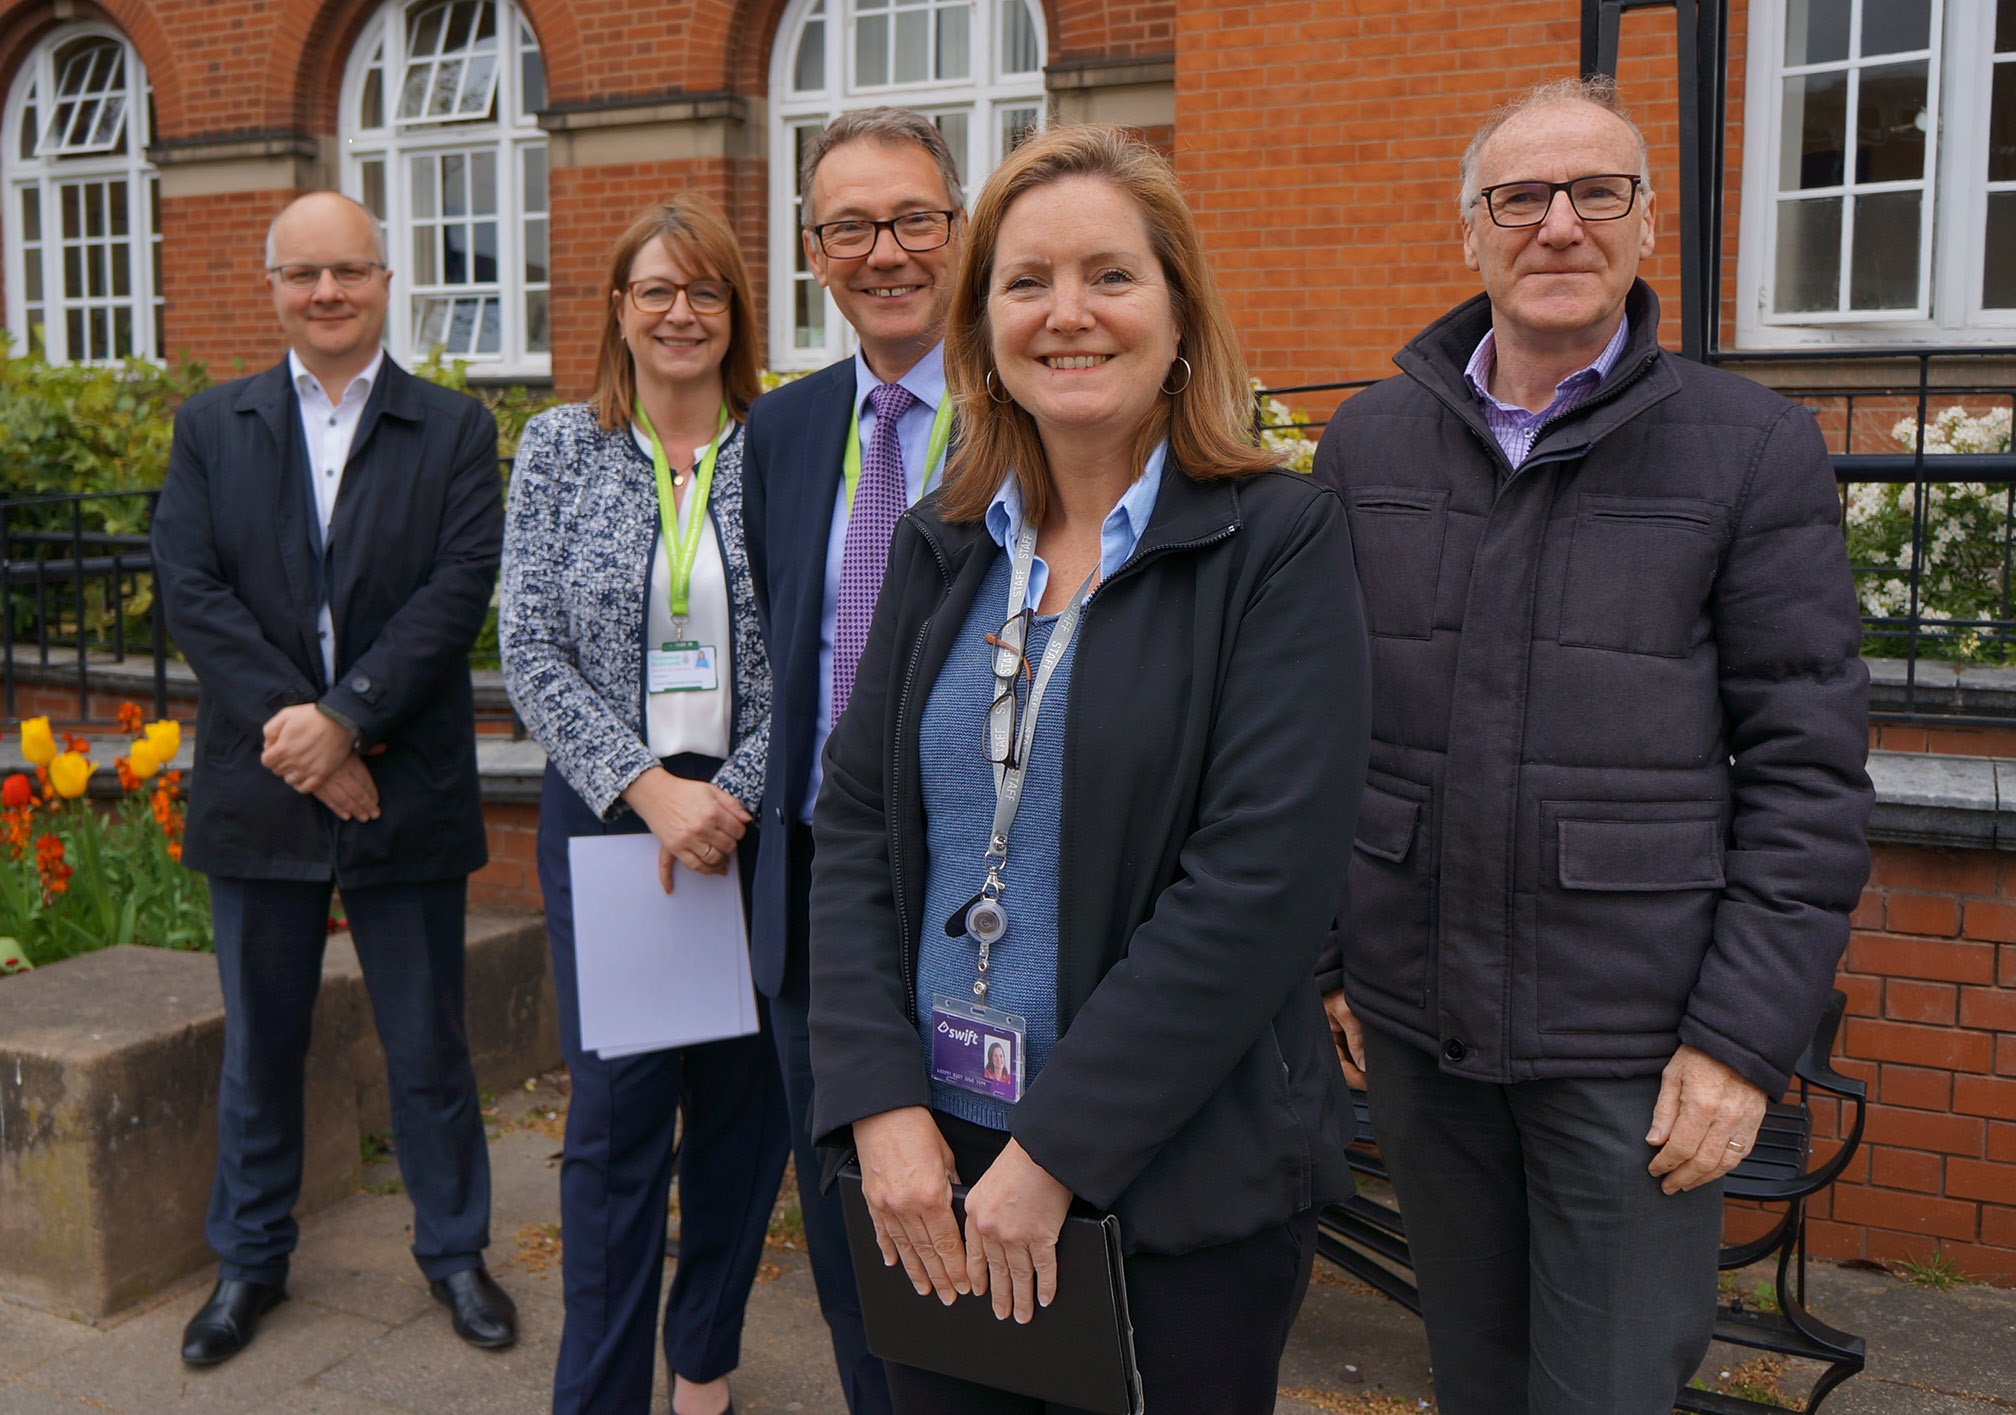 WMCA chief executive Laura Shoaf (centre) and strategic planning manager, Rob Lamond, (far left) were given a warm welcome by Nuneaton and Bedworth Borough Council’s chief executive Brent Davis (centre left) during their visit to Nuneaton town centre